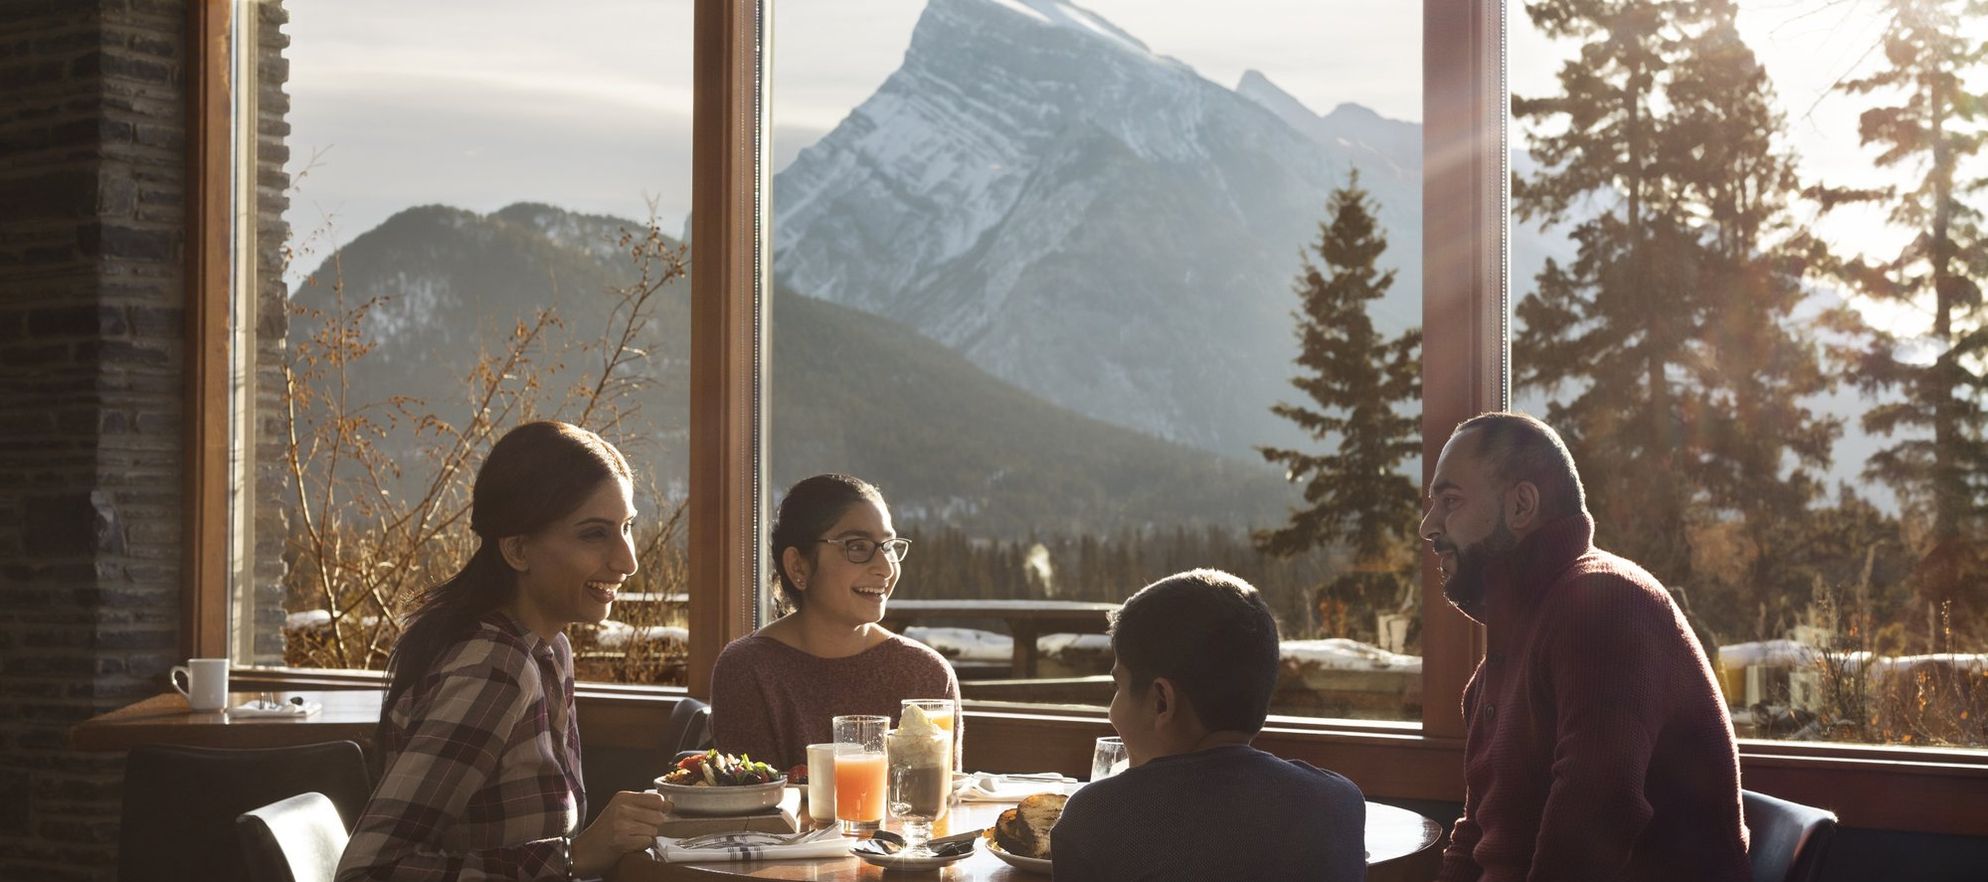 A family of four enjoying a meal with Rundle Mountain and snow visible in the window behind them